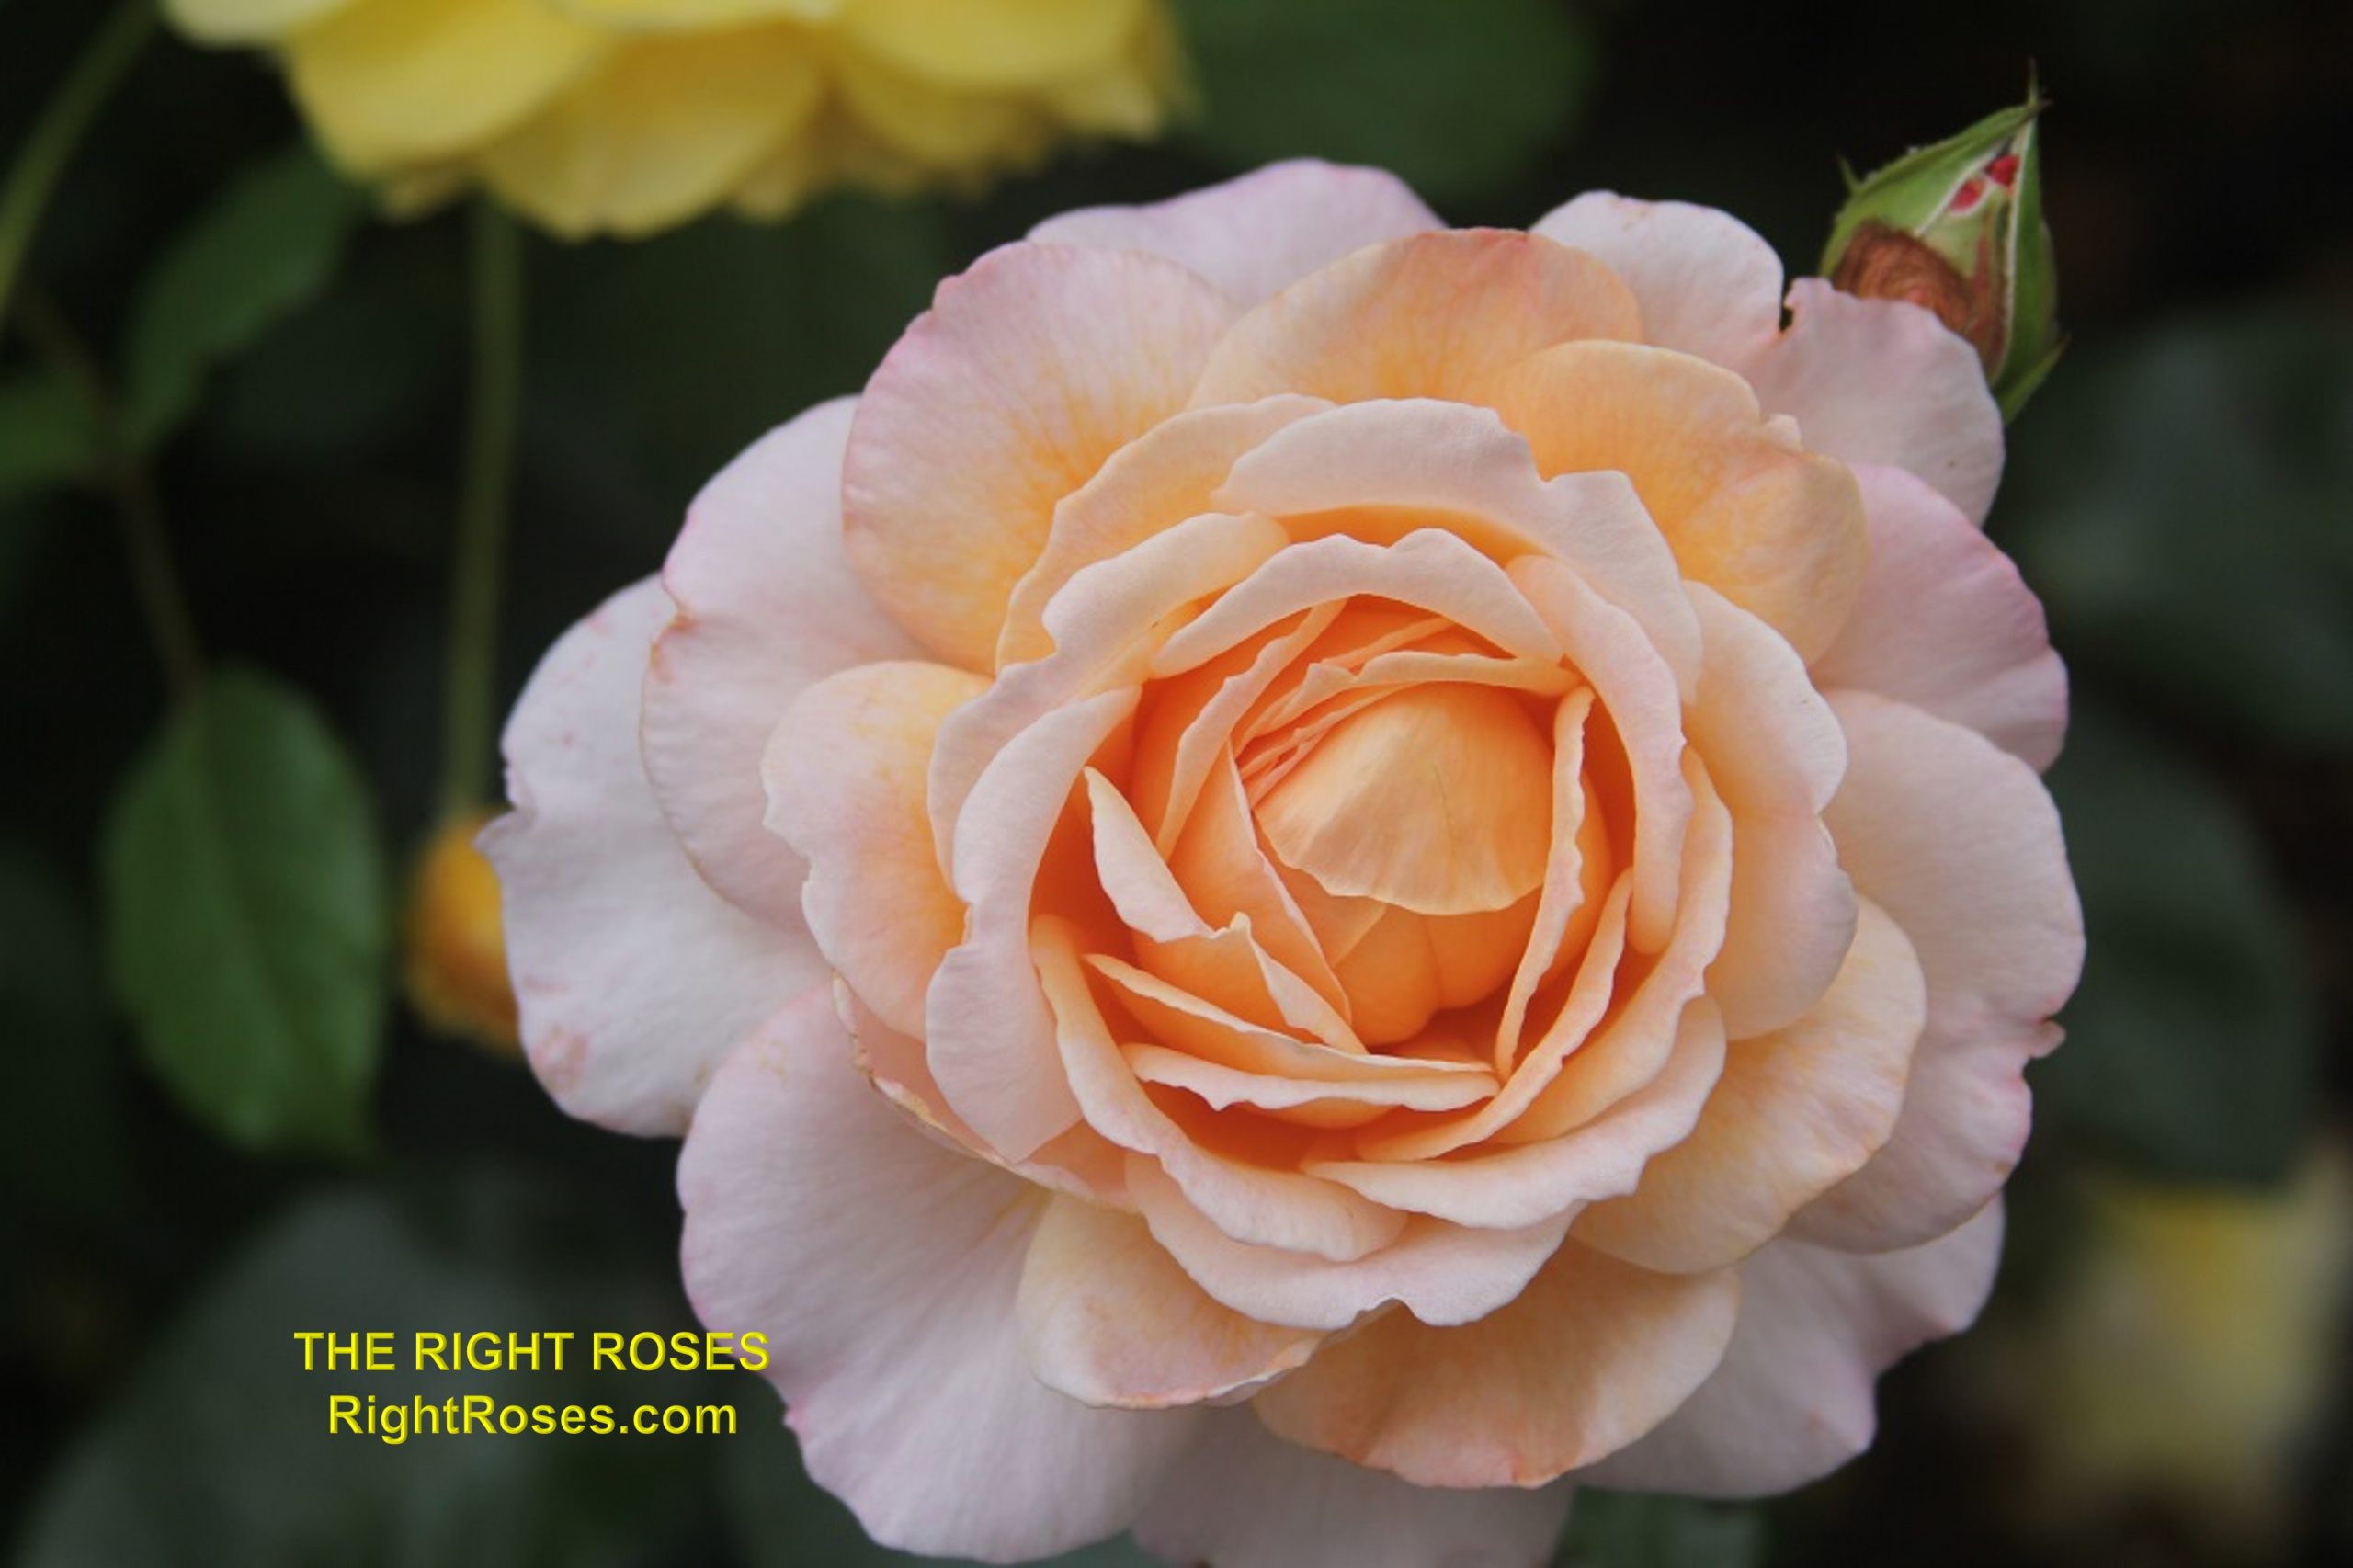 The Right Roses presents you with the best rose review of rose Sespe Sunrise (aka. Großherzogin Luise, Spicy Parfuma) | Kordes Rosen 2017. Millions of gardeners from all over the world have trusted our in-depth reviews. The Right Roses team uses our own, bespoke The Right Roses Score, which is the most comprehensive rose rating system in the world, to assess the overall quality of a rose. We review all the very best roses from all the best rose breeders such as Rosen Kordes, Rosen Tantau, Delbard, David Austin Roses. The Right Roses is also running the best gardening club for the very best connoisseur gardeners and garden designers at Righttify.com. At Righttify.com, connoisseur sellers can sell new garden plants, resell pre-loved garden plants. In addition, buyers can buy the very best plants in the world.